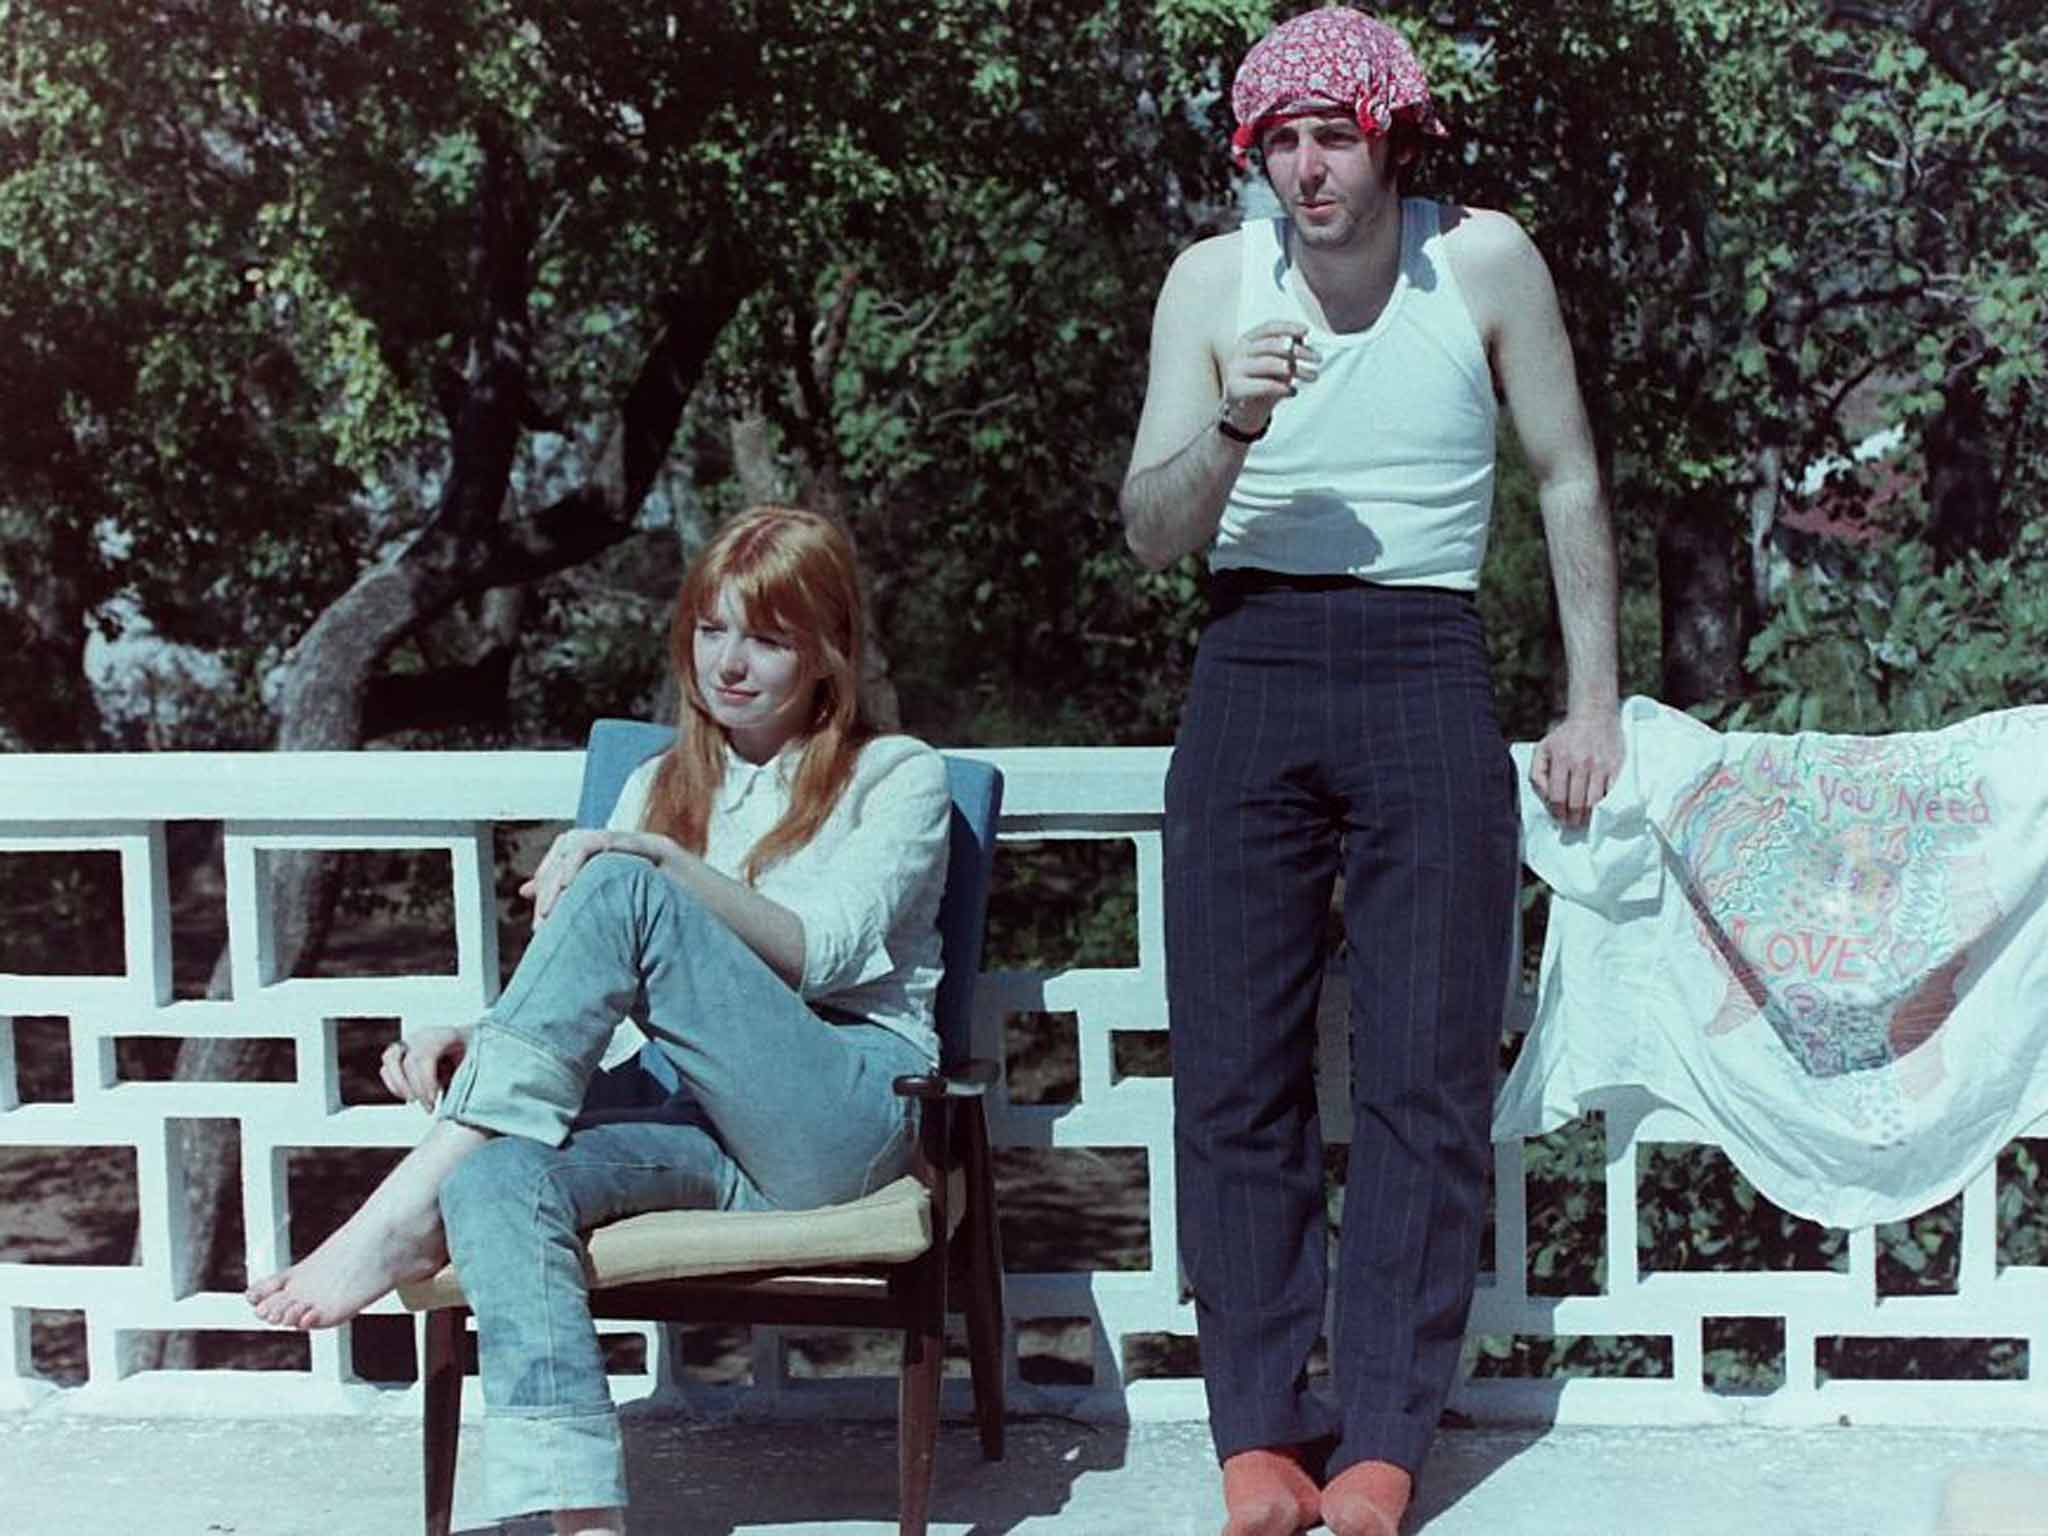 Paul 'being very Liverpool' with Jane Asher